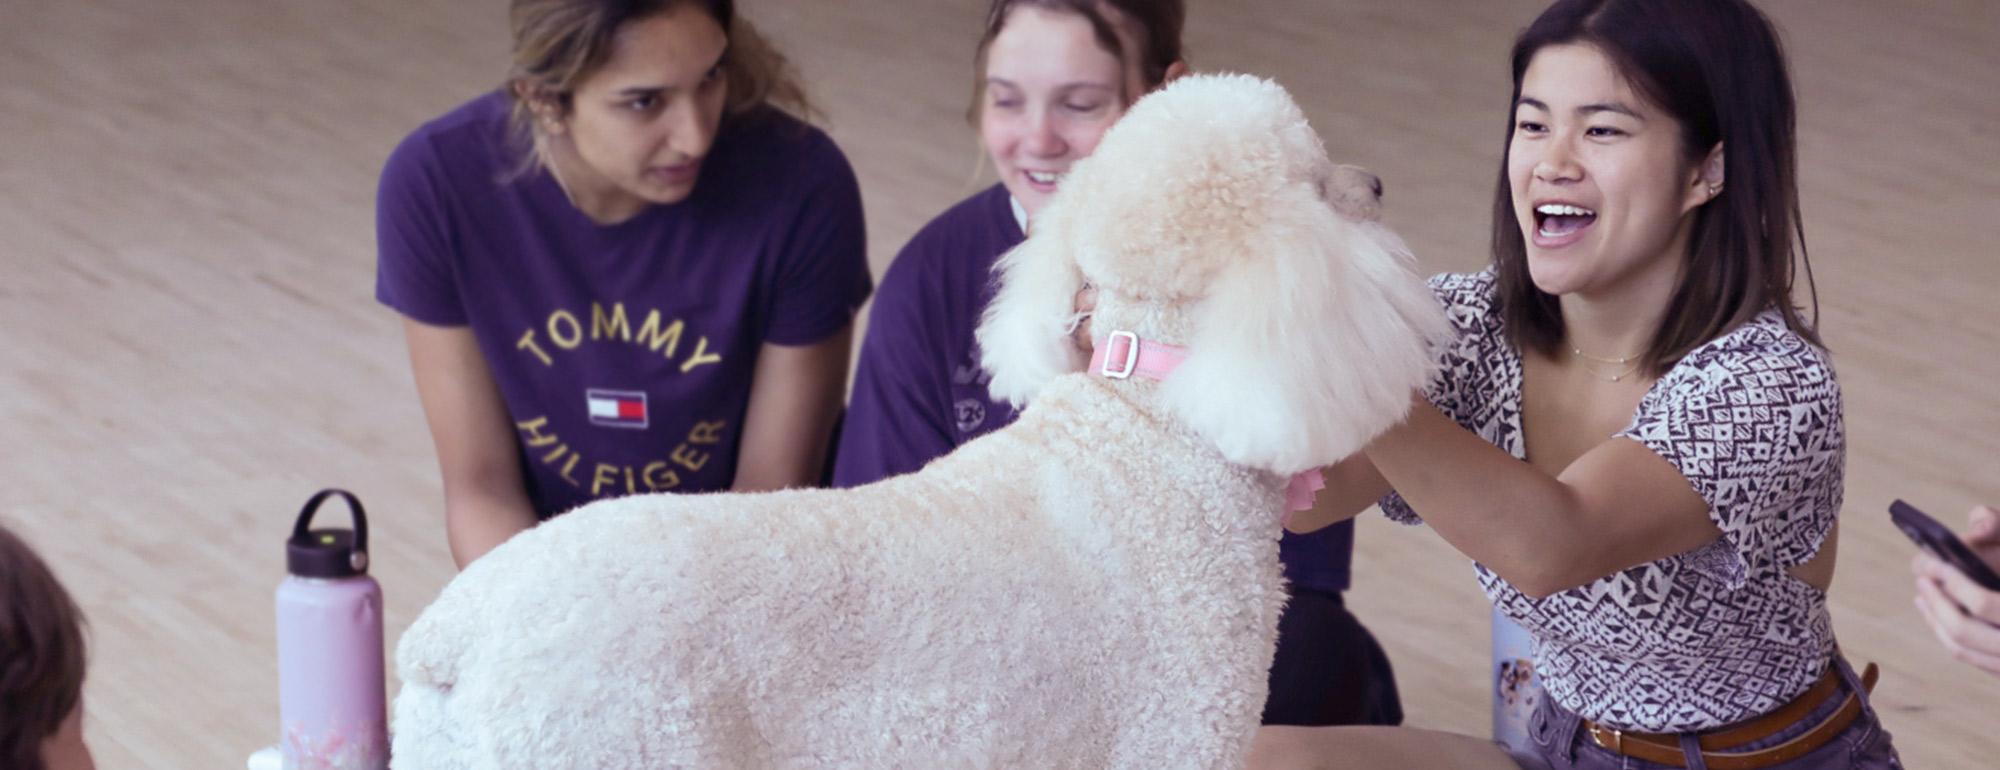 Several students gather around a poodle dog. One of them snuggles its face and smiles.